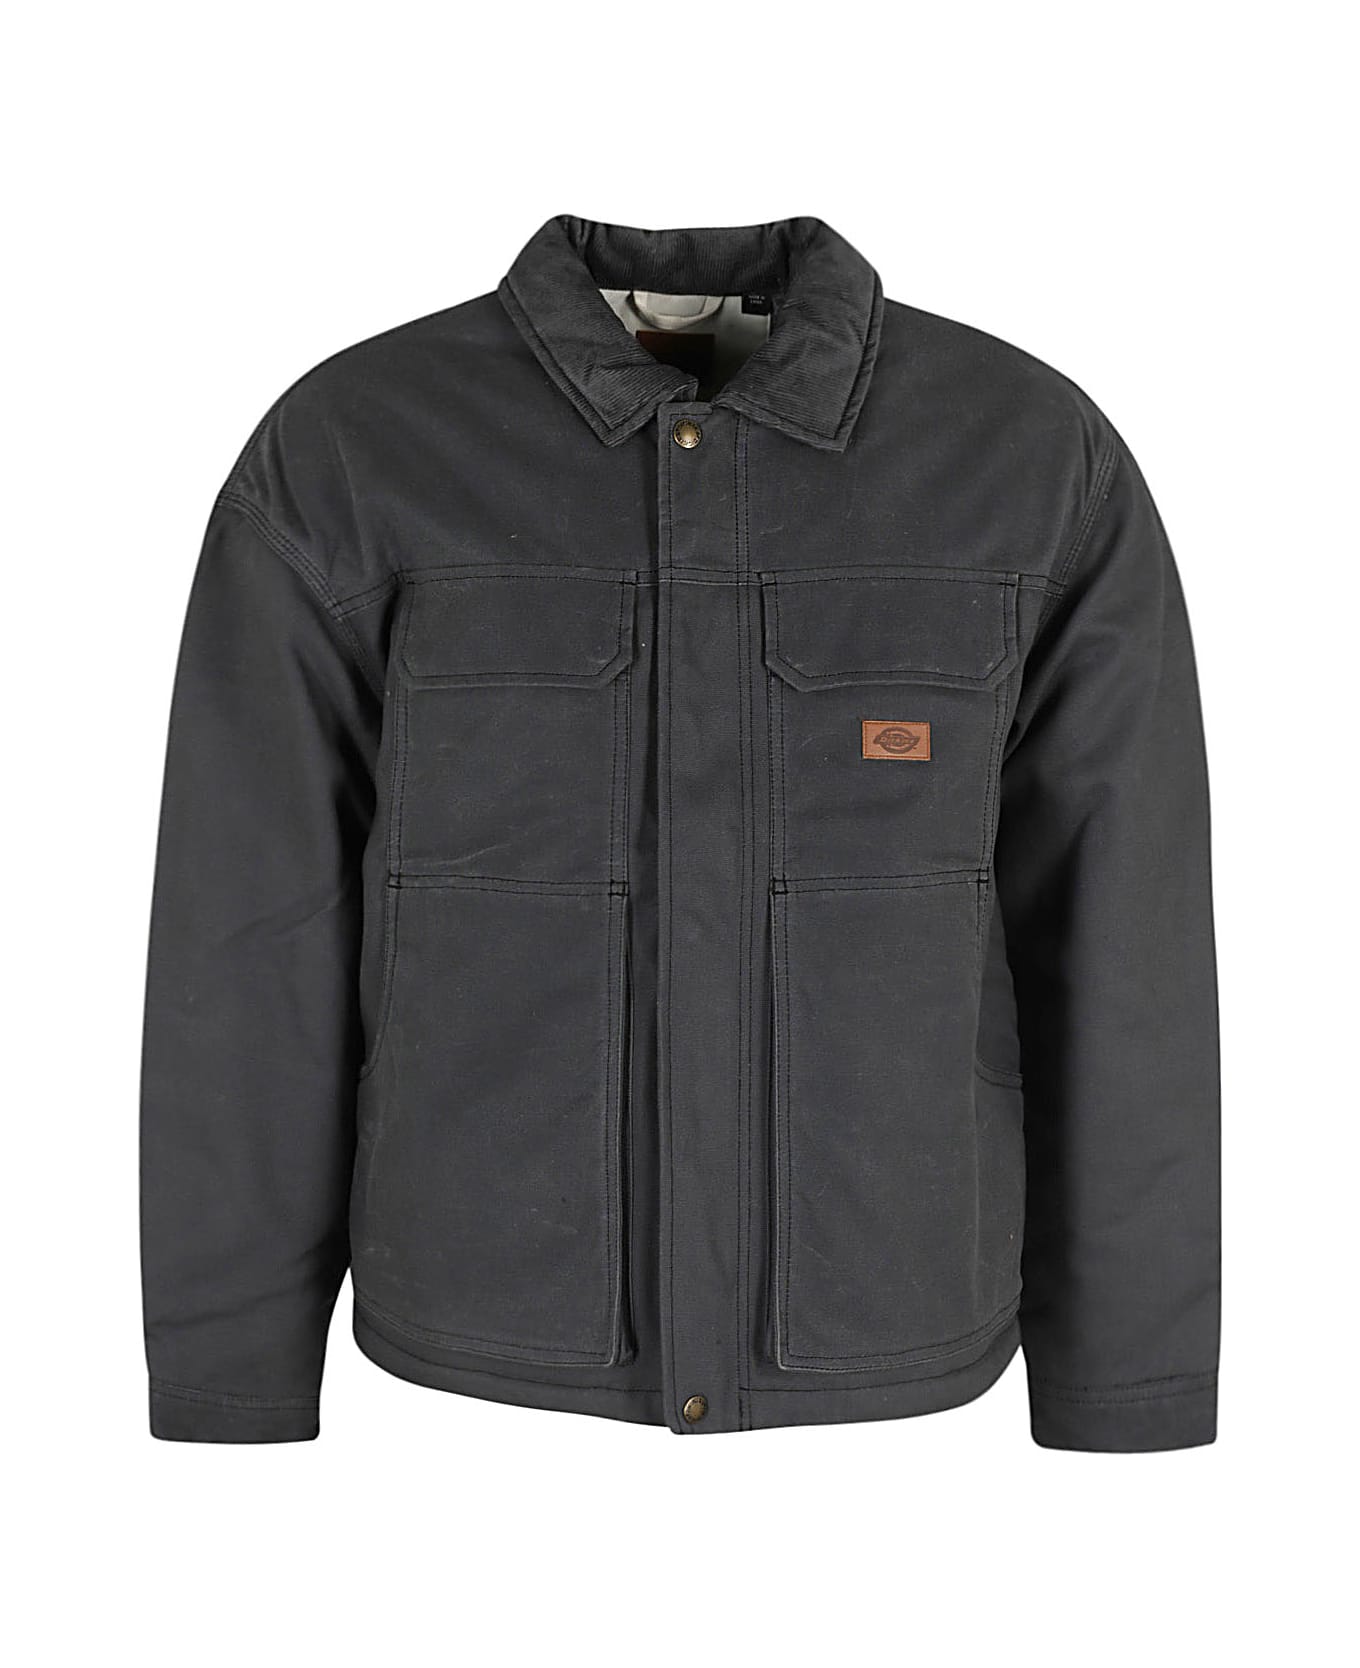 Dickies Lucas Waxed Pocket Front Jacket - Charcoal Grey